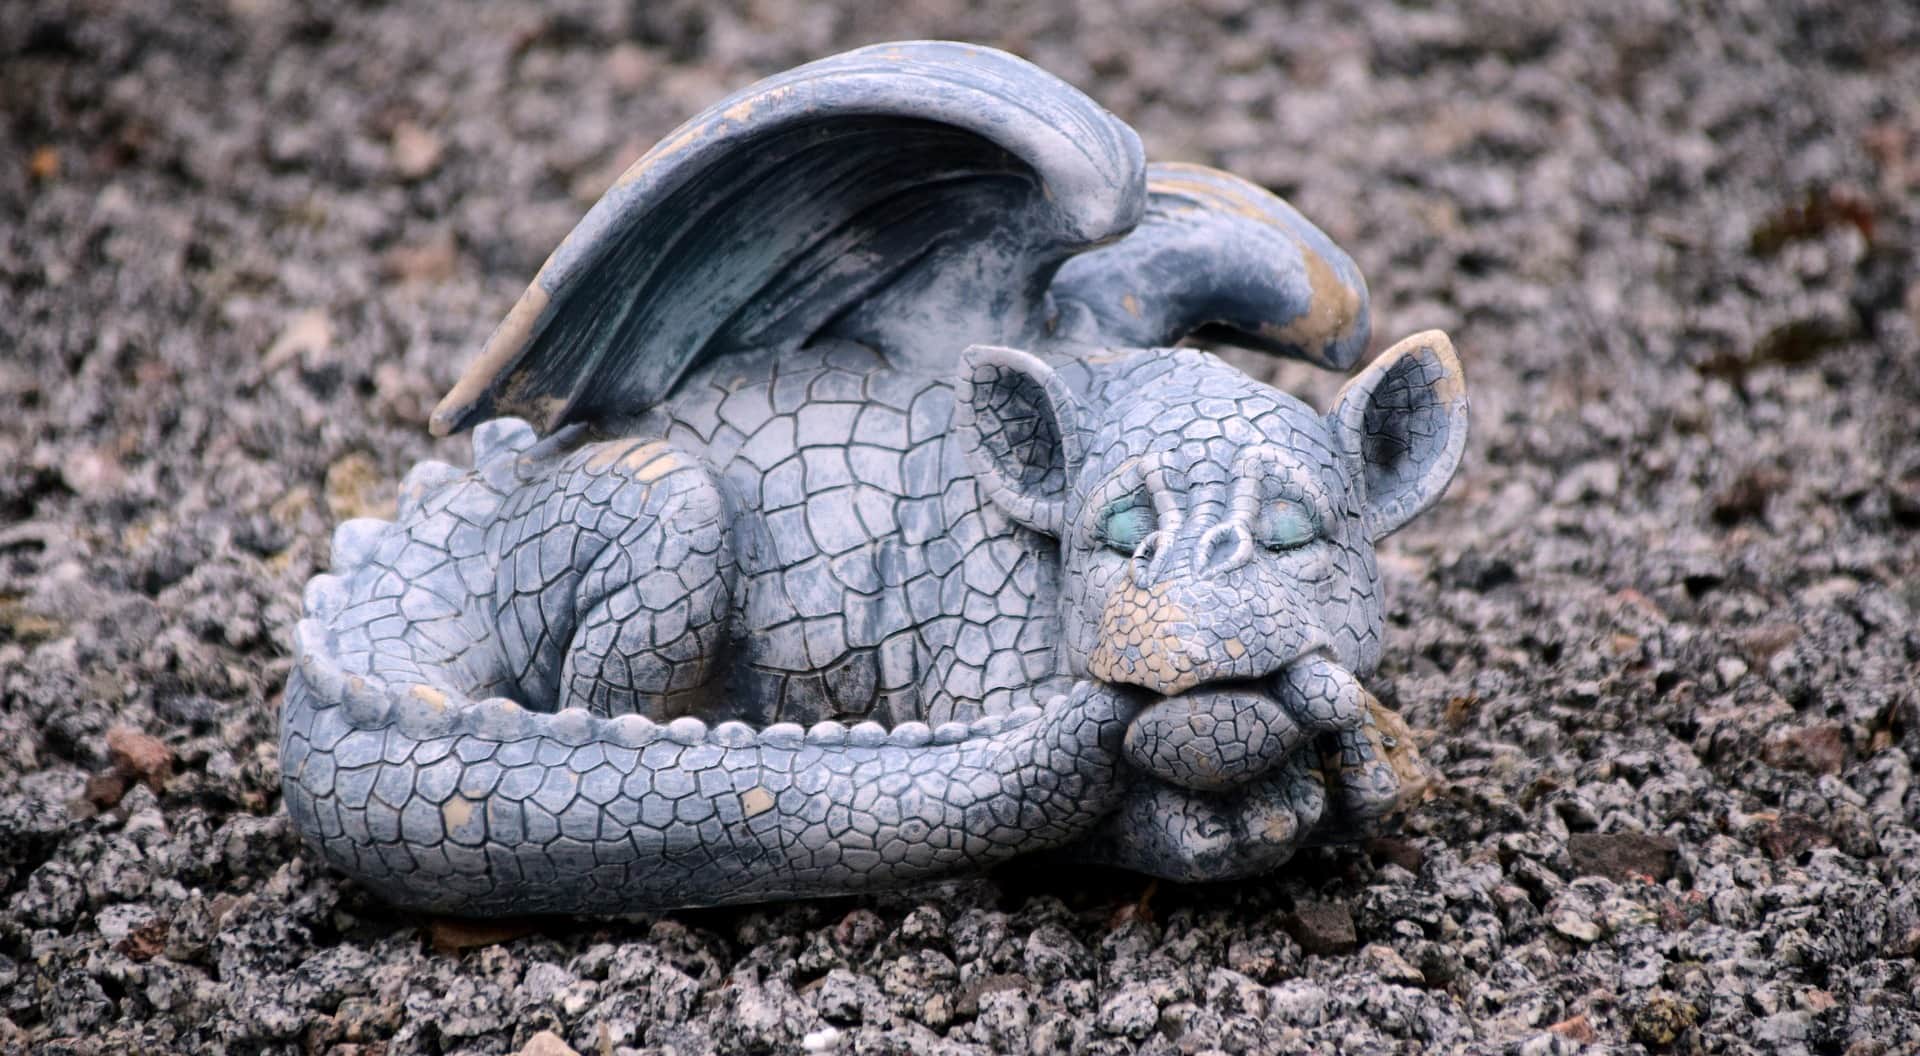 25 Find Cute Quirky Statues For the Yard